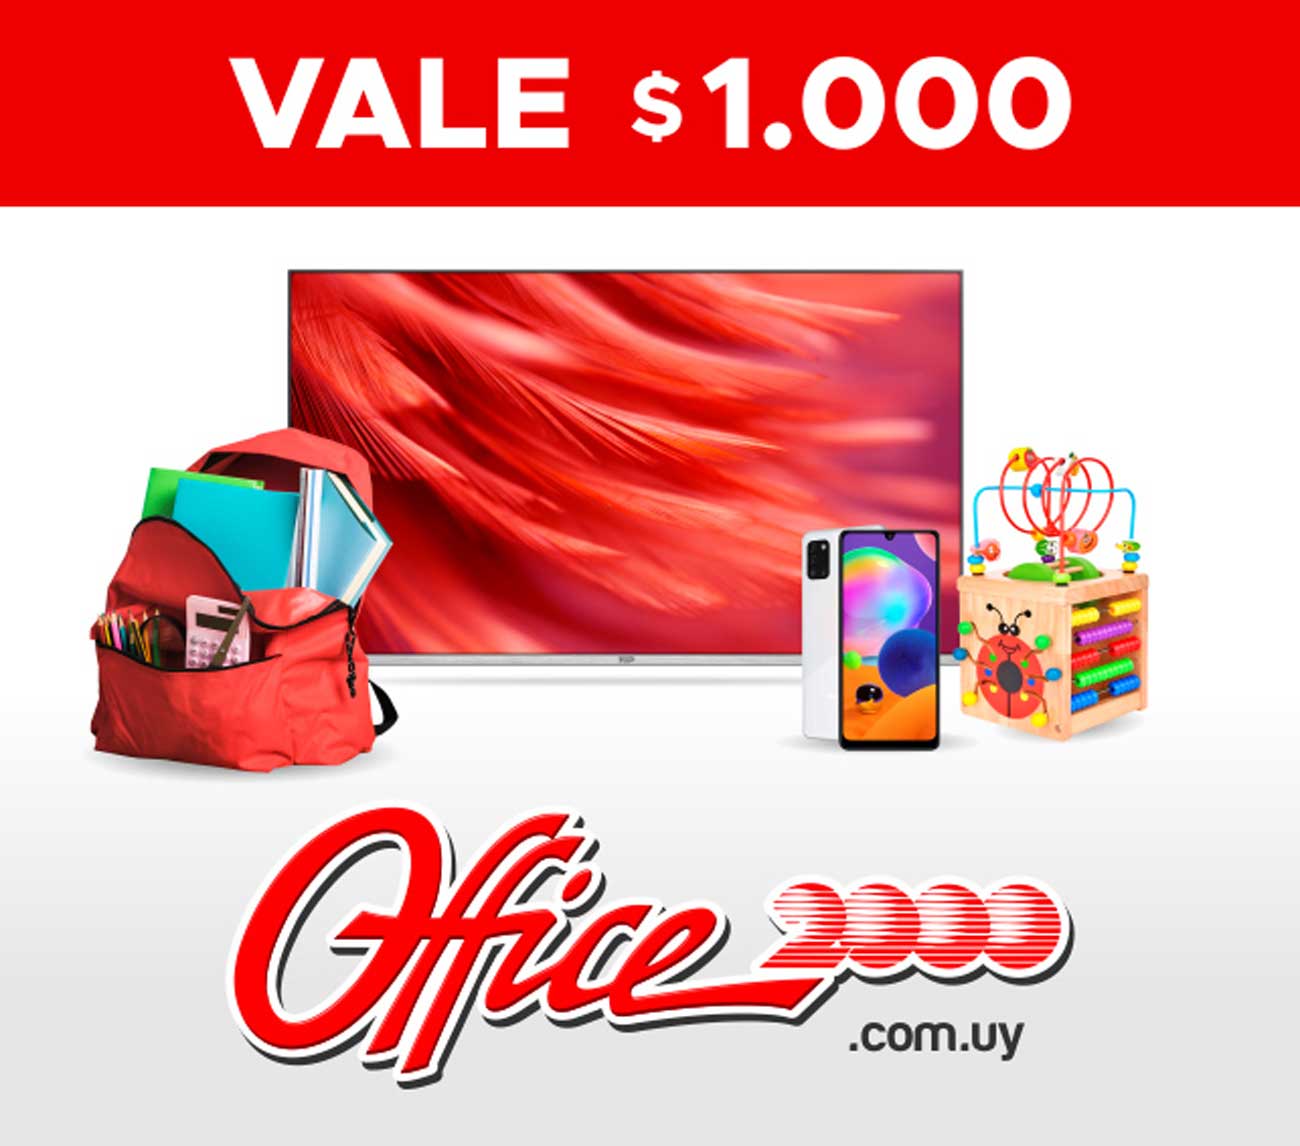 VALE OFFICE 2000